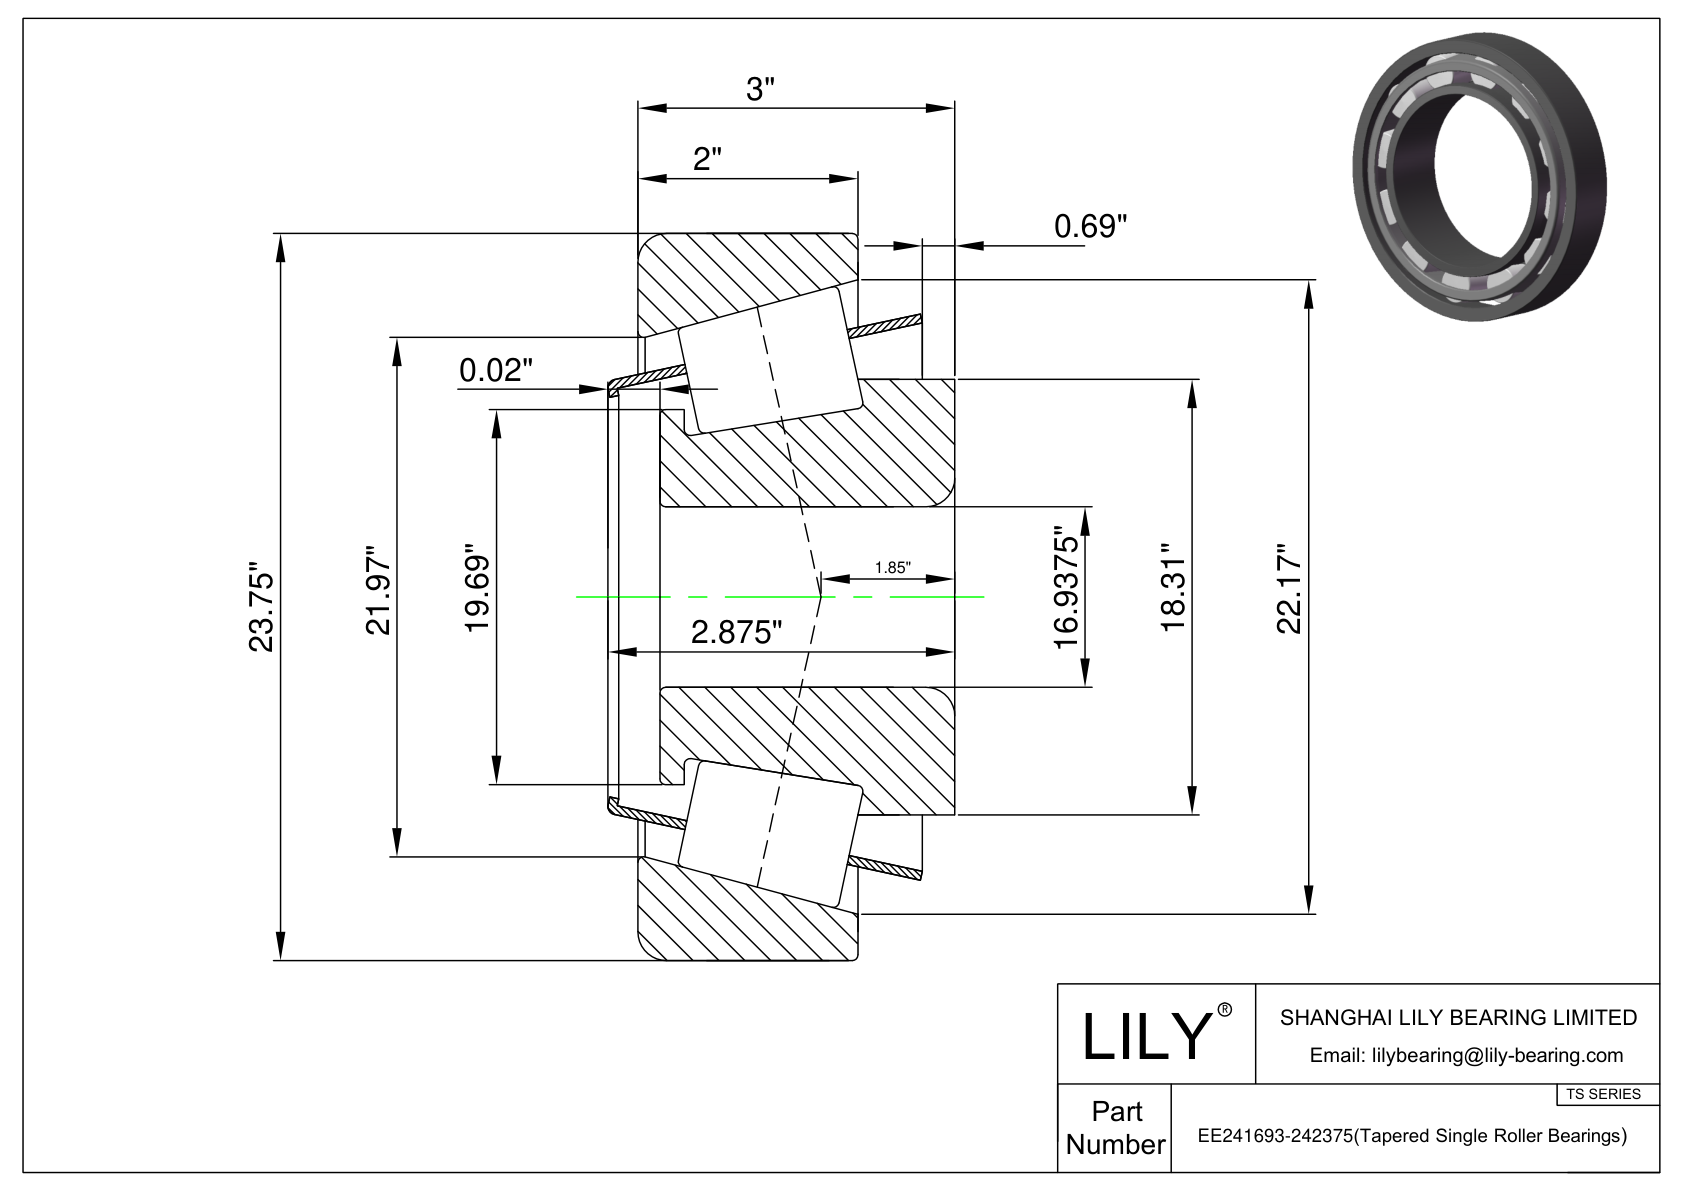 EE241693-242375 TS (Tapered Single Roller Bearings) (Imperial) cad drawing